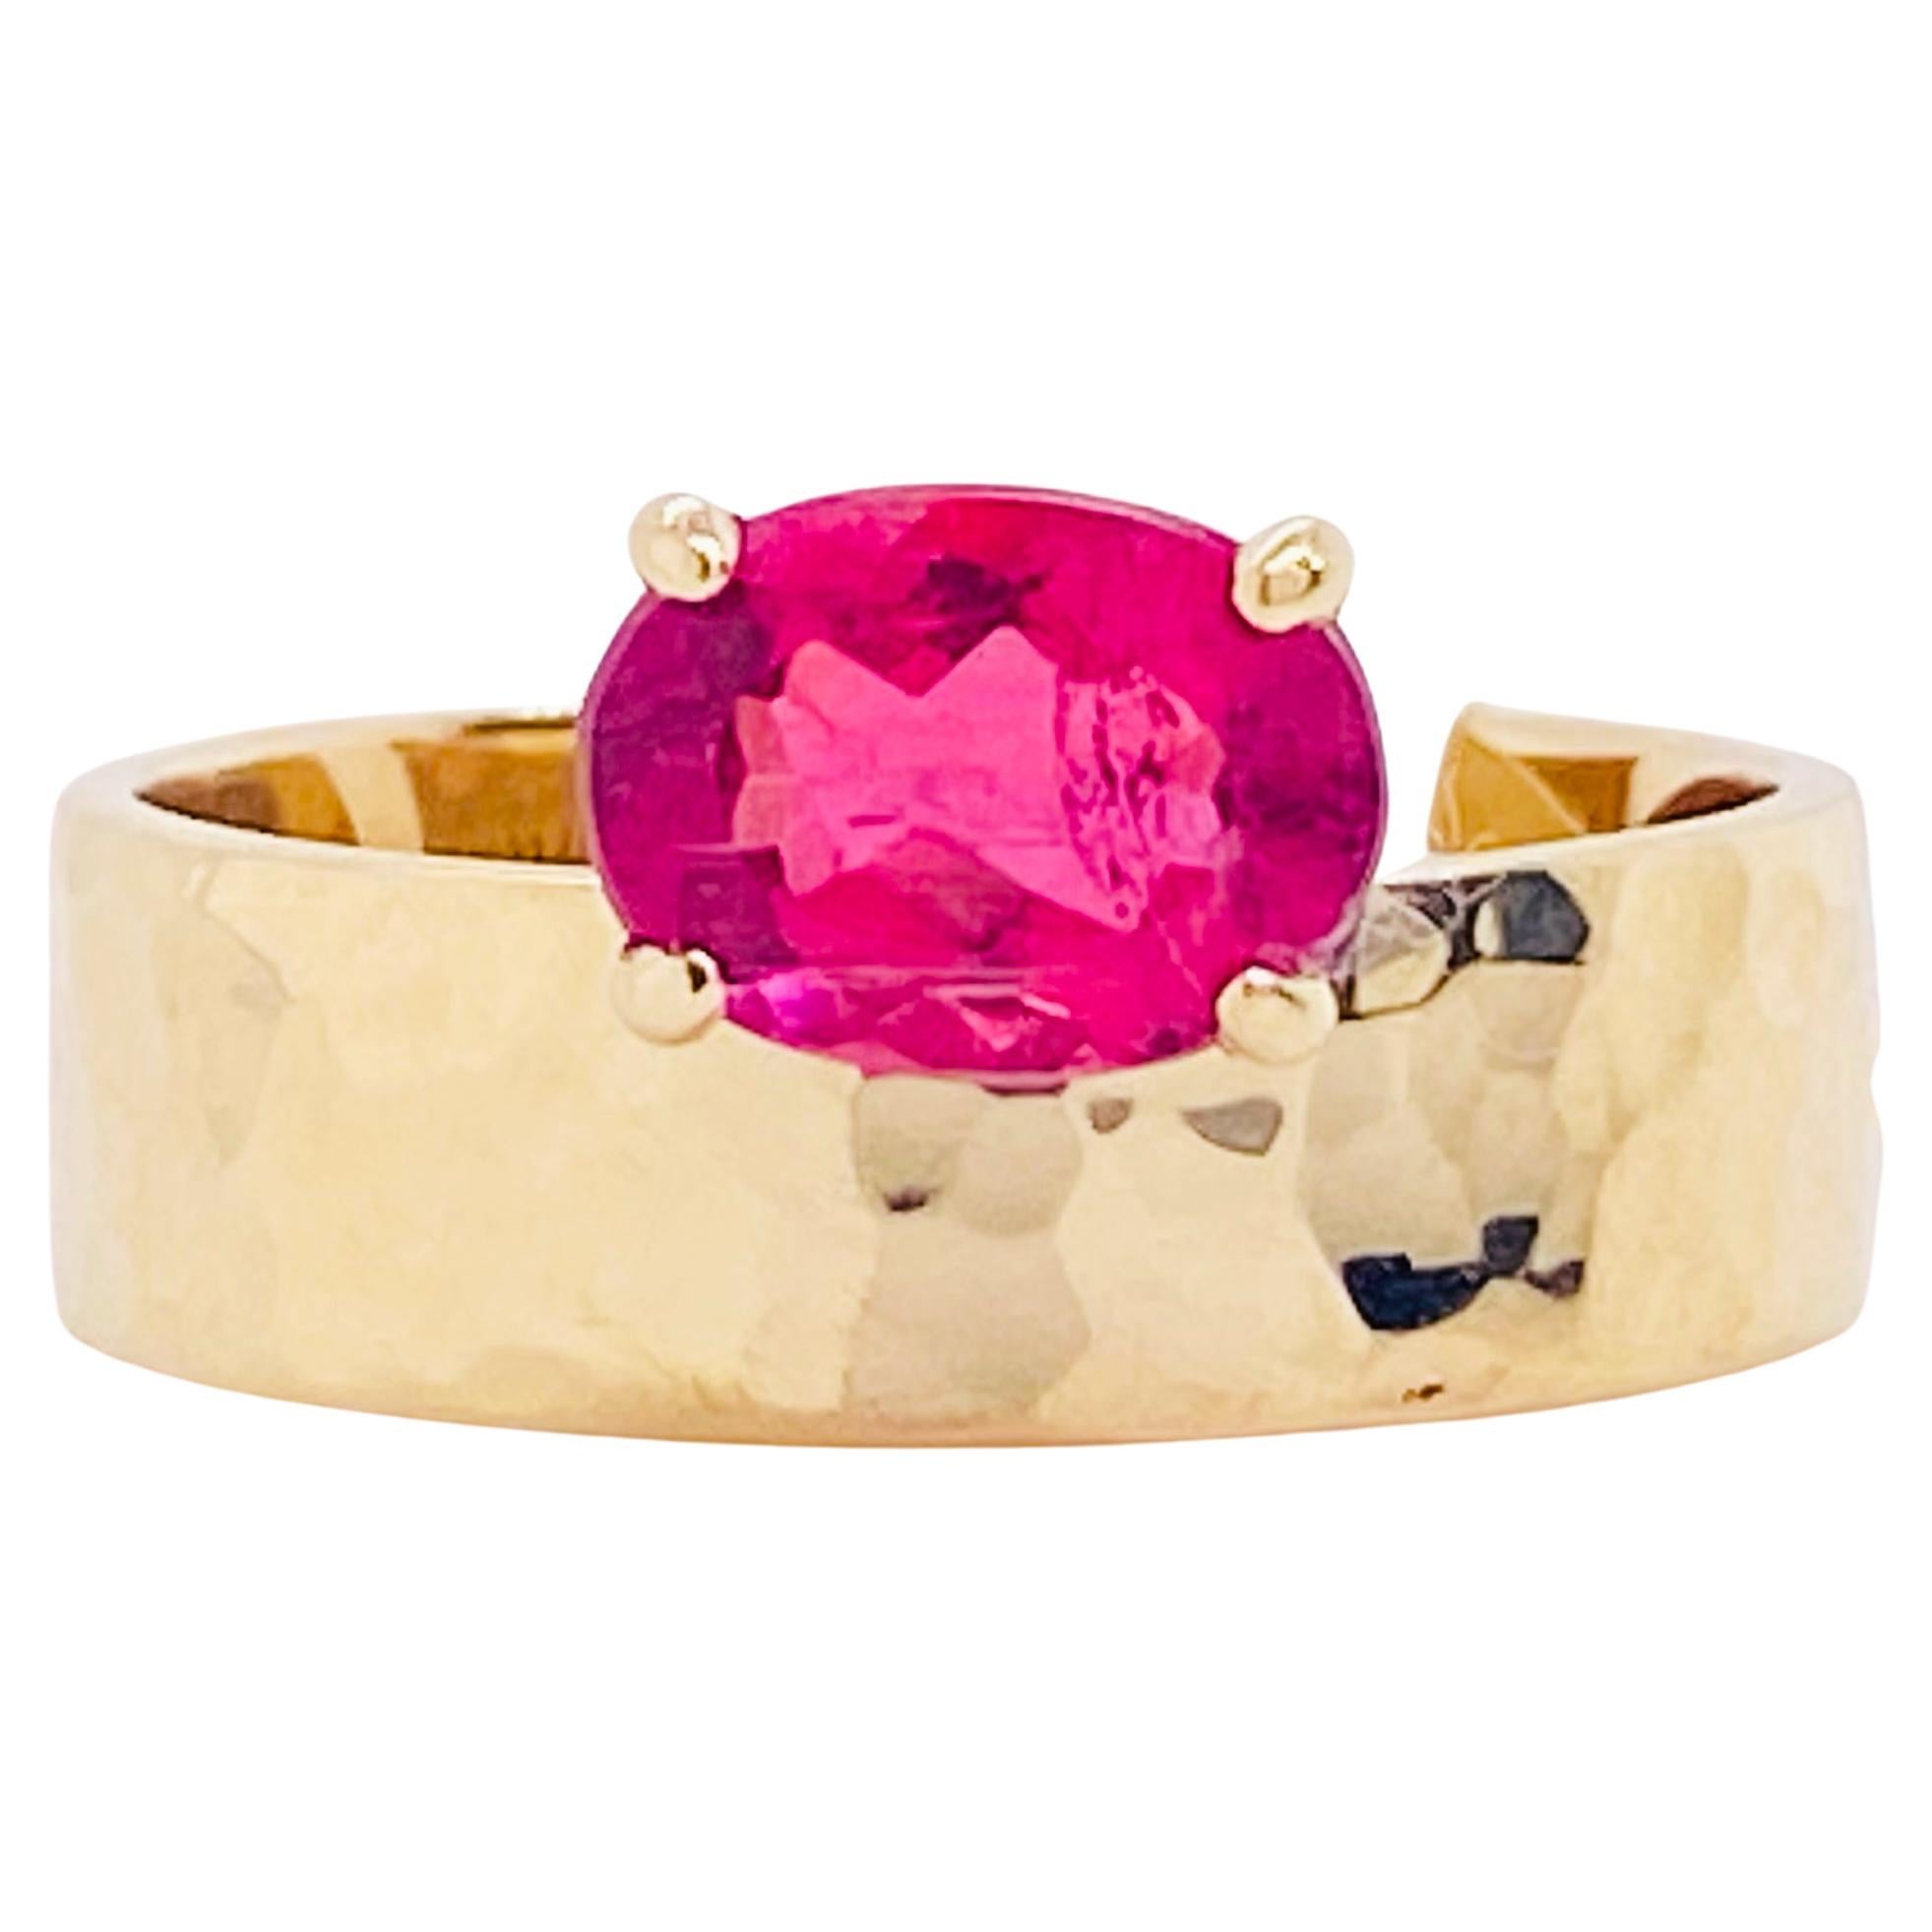 Pink Tourmaline Oval Ring 14K Yellow Gold Hammered Wide Band 1.32 Carat Gemstone